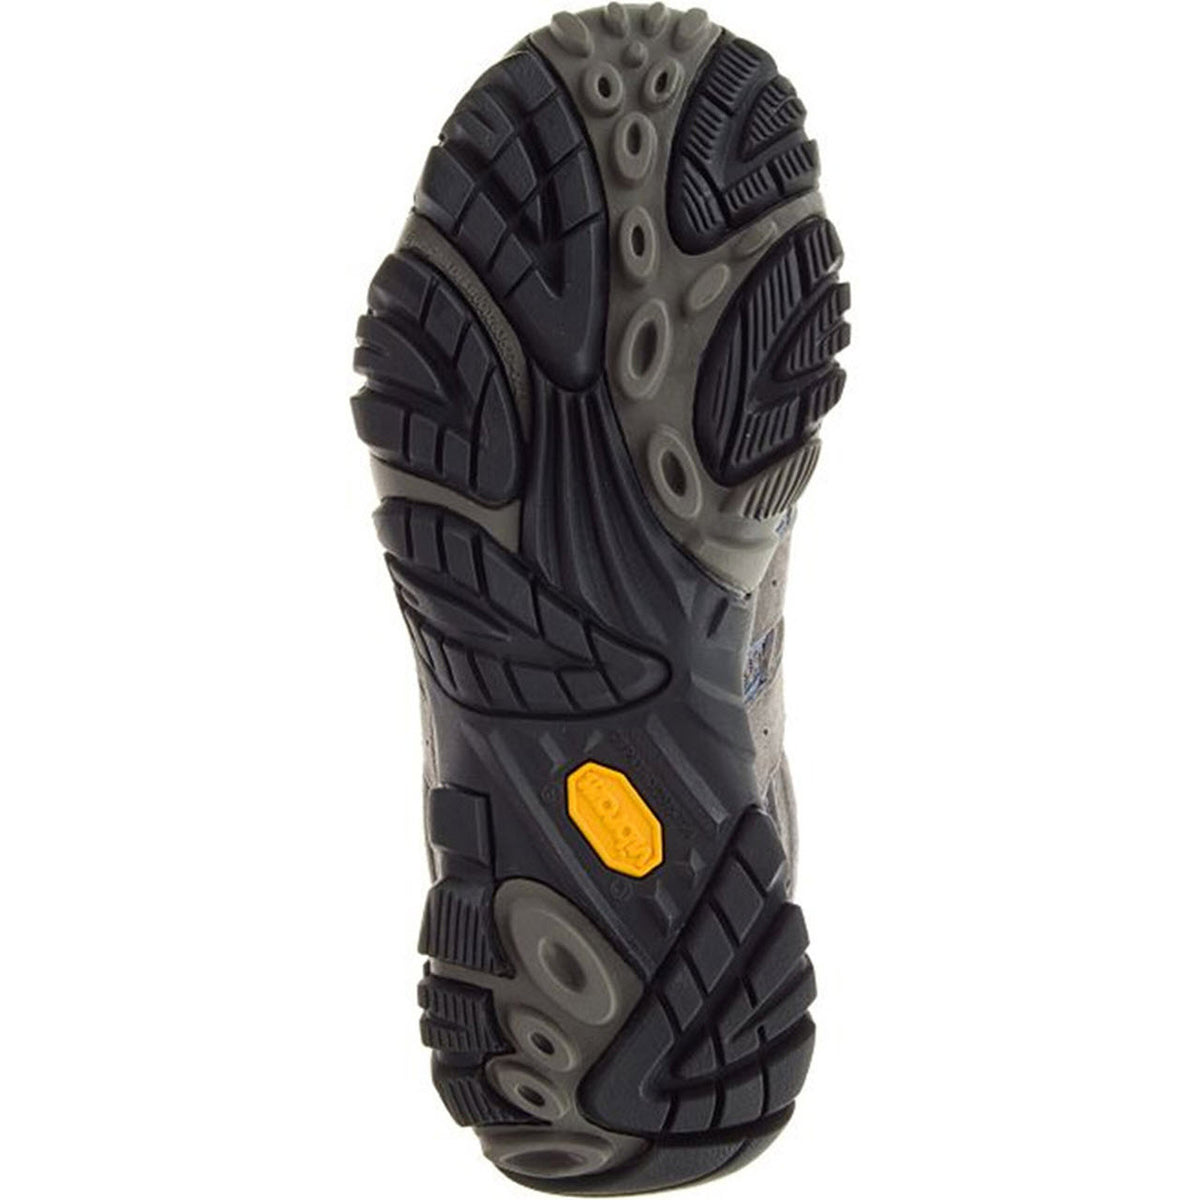 Sole of a Merrell hiking boot featuring multi-directional treads and an orange oval logo with a Vibram rubber outsole.